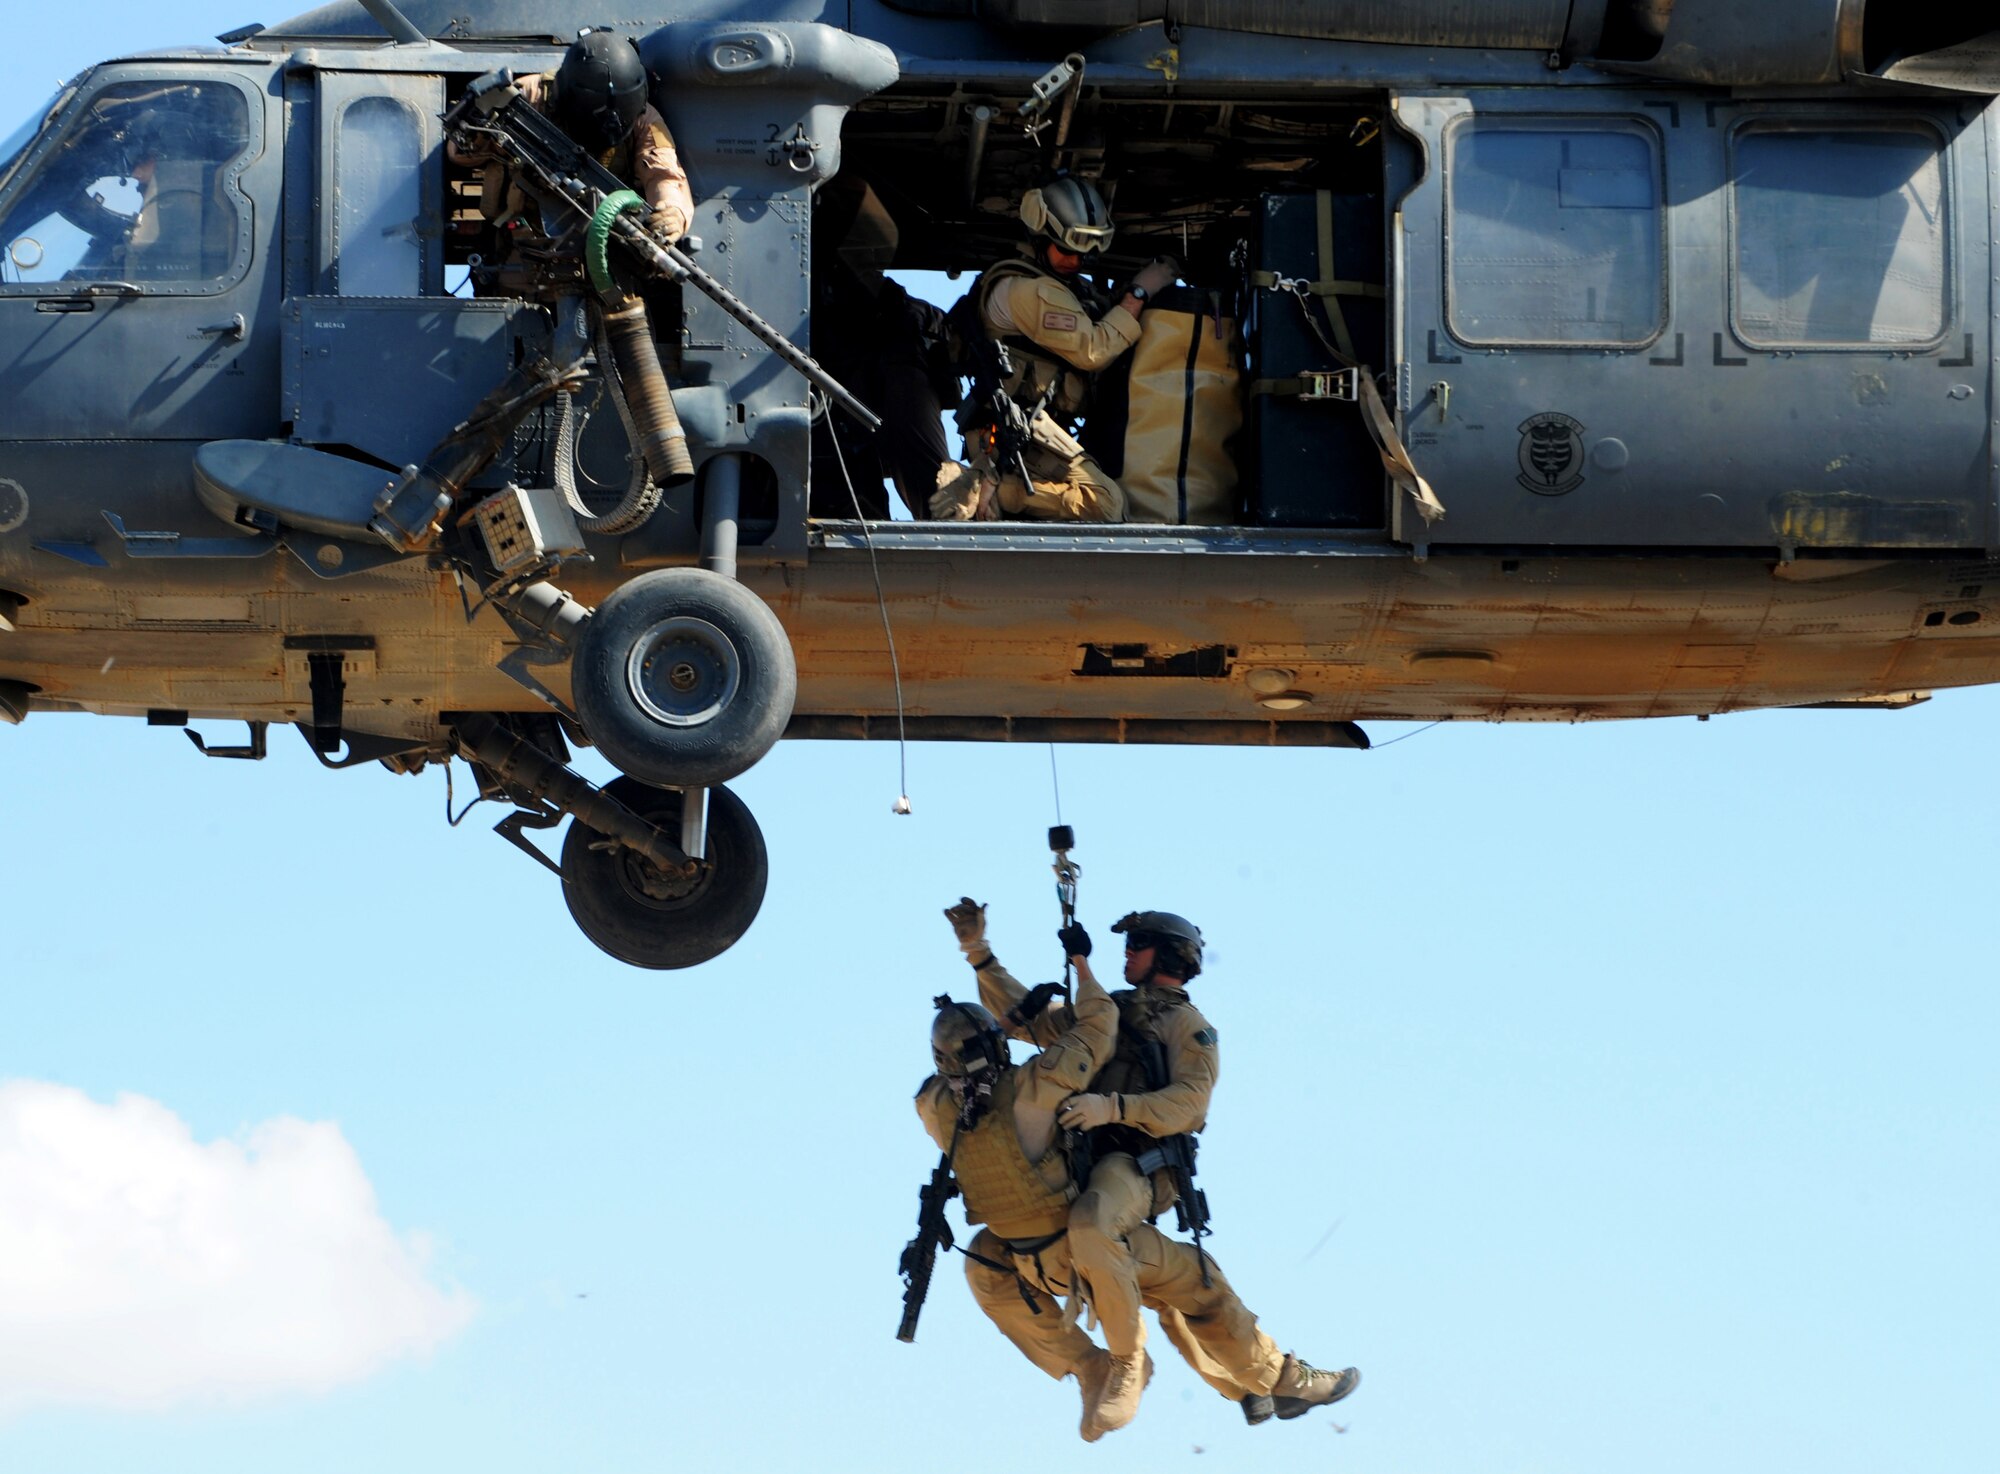 U.S. Air Force Pararescuemen from the 64th Expeditionary Rescue Squadron, Joint Base Balad, Iraq, are hoisted into an HH-60 Pavehawk helicopter outside of Baghdad, Iraq during a proficiency exercise April 10, 2009, in support of Operation Iraqi Freedom.  (U.S. Air Force photo by Staff Sgt. James L. Harper Jr.)